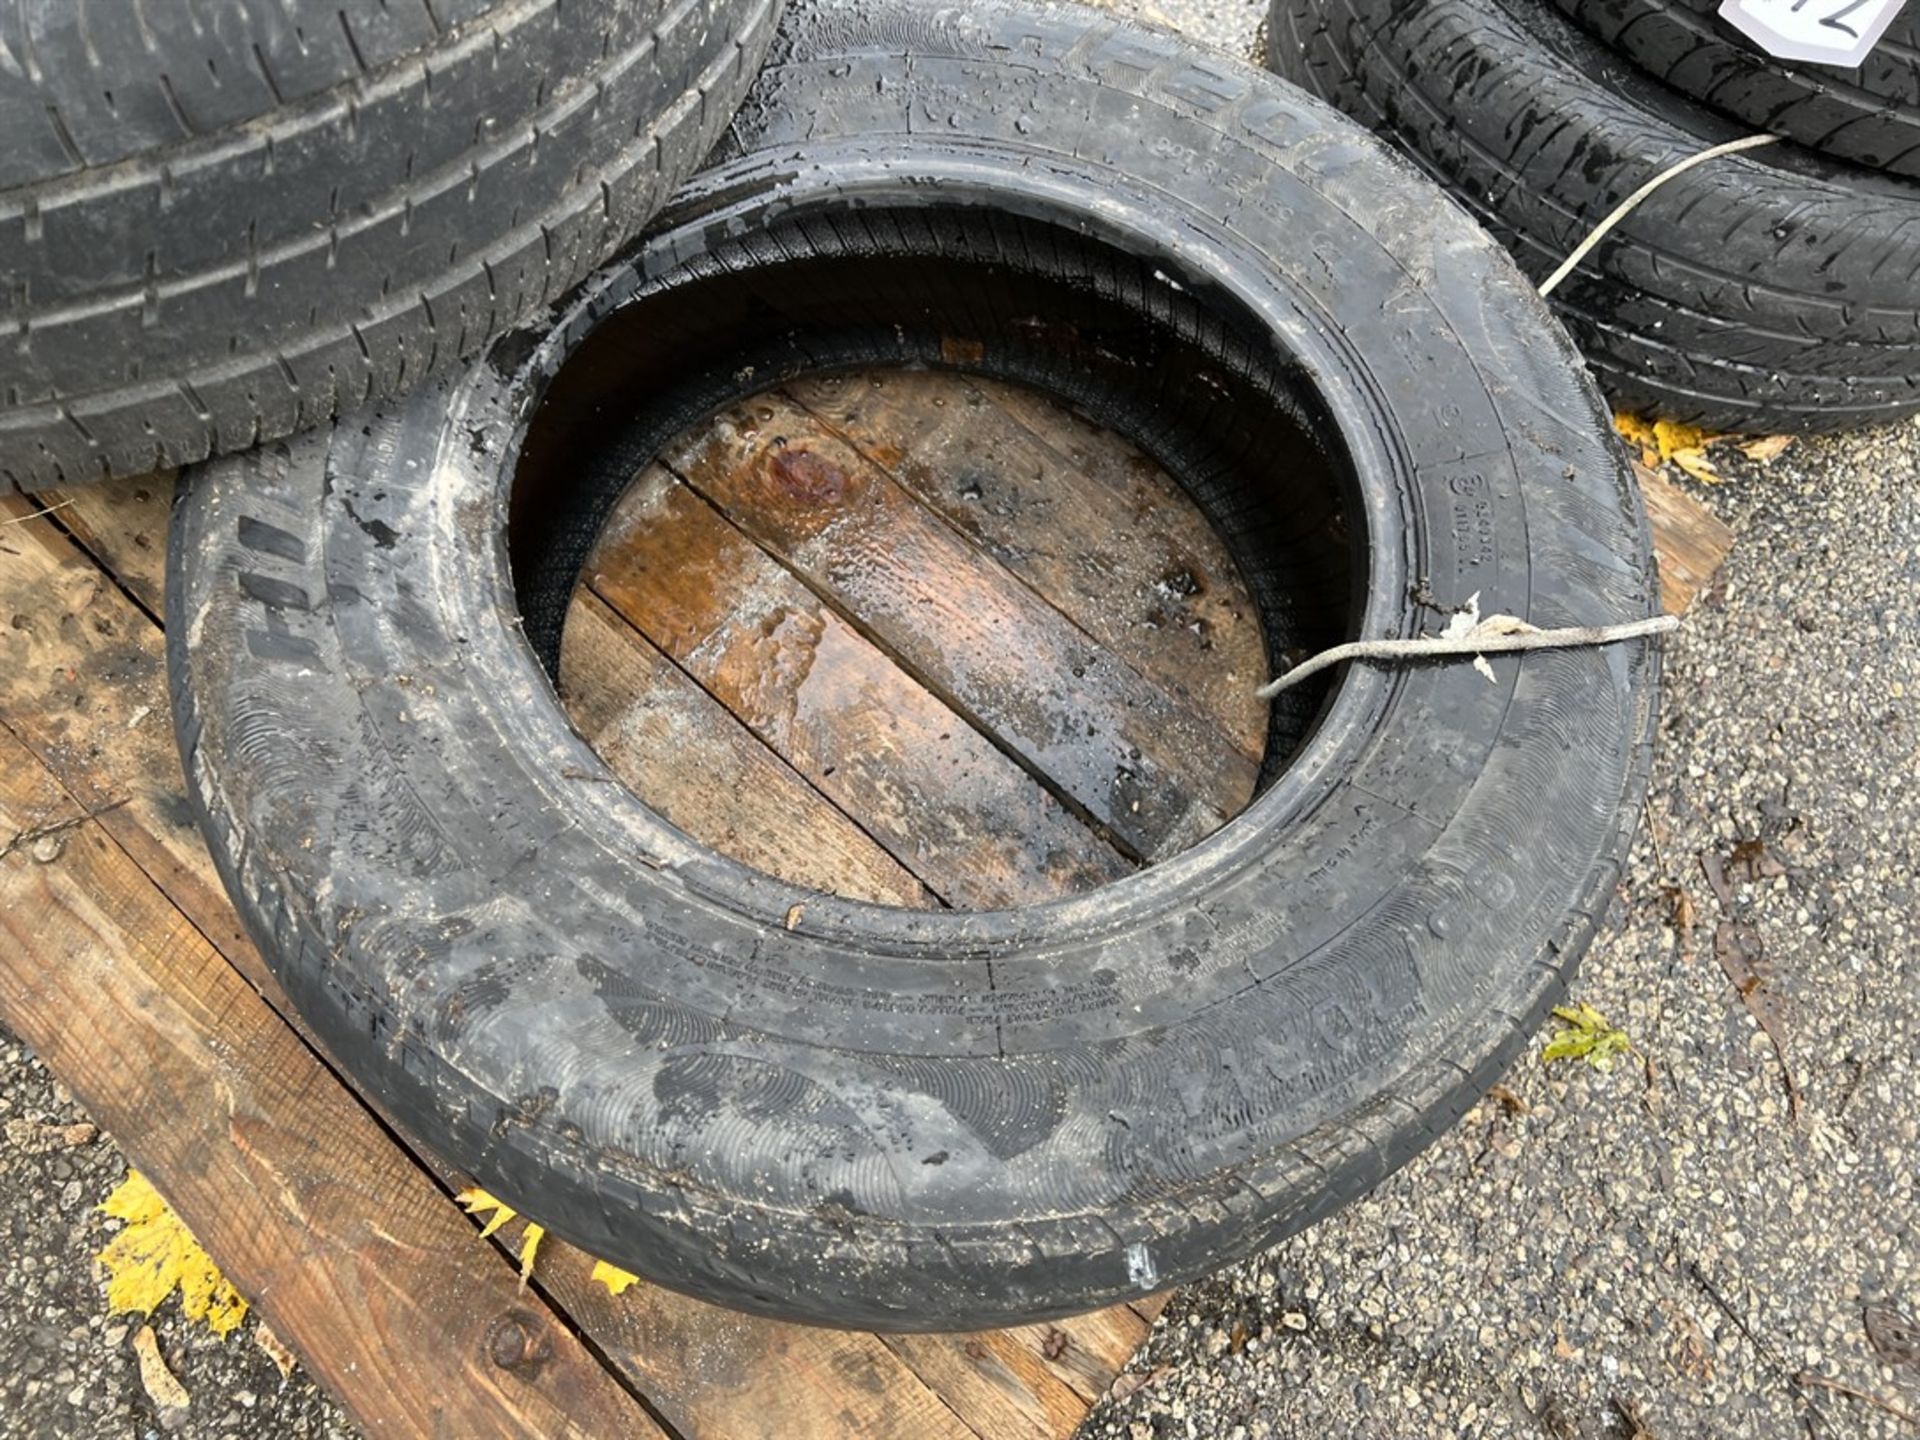 Lot Comprising (3) Tires, (1) 215/65R16 98T, (1) 195/65R15, and (1) 195/70R1491H Tubeless - Image 5 of 6